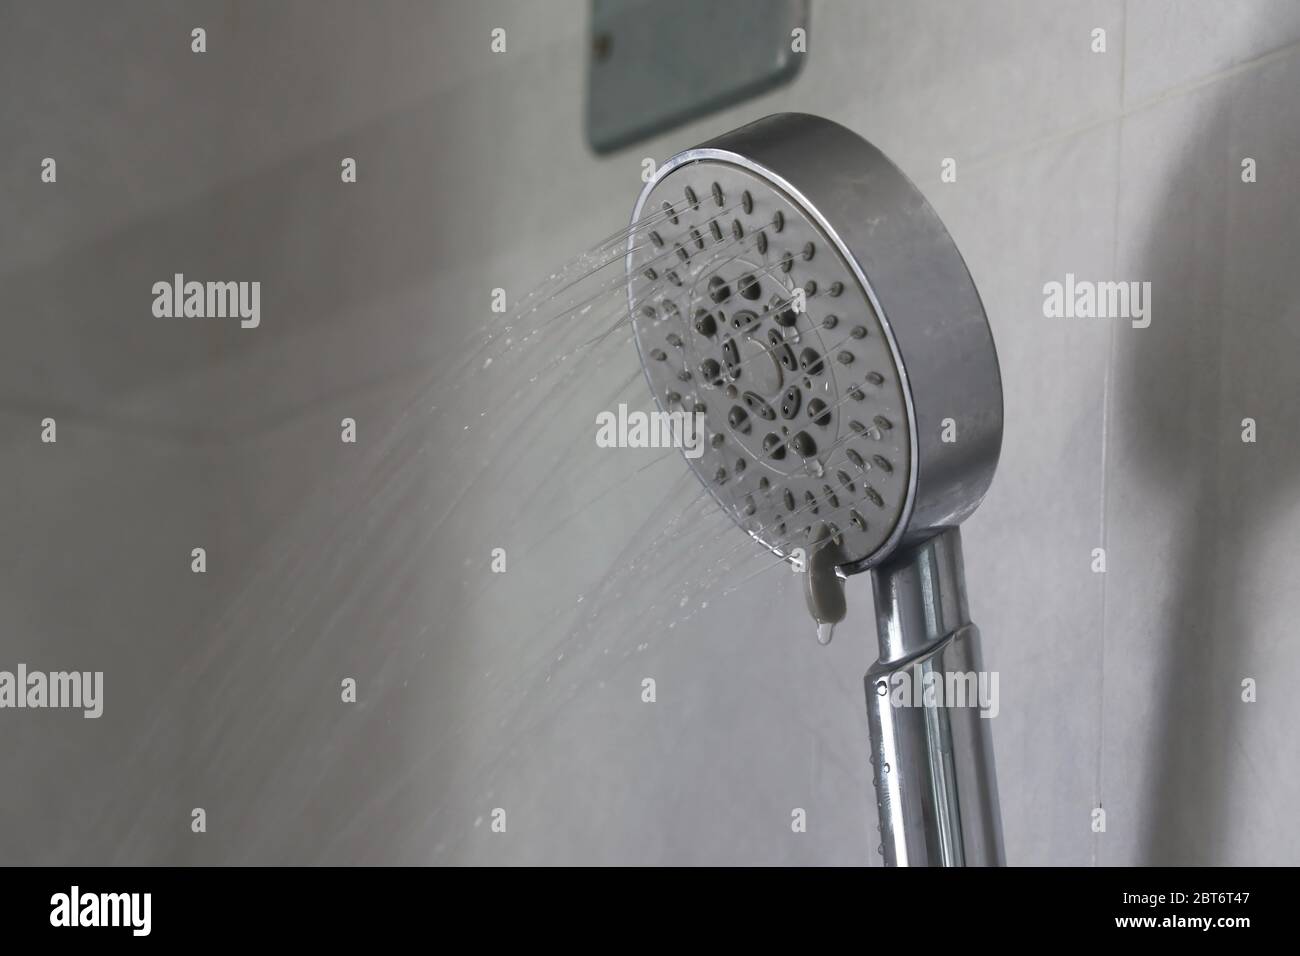 Water that flows out of the shower gently. Water flows out of the shower. Stock Photo